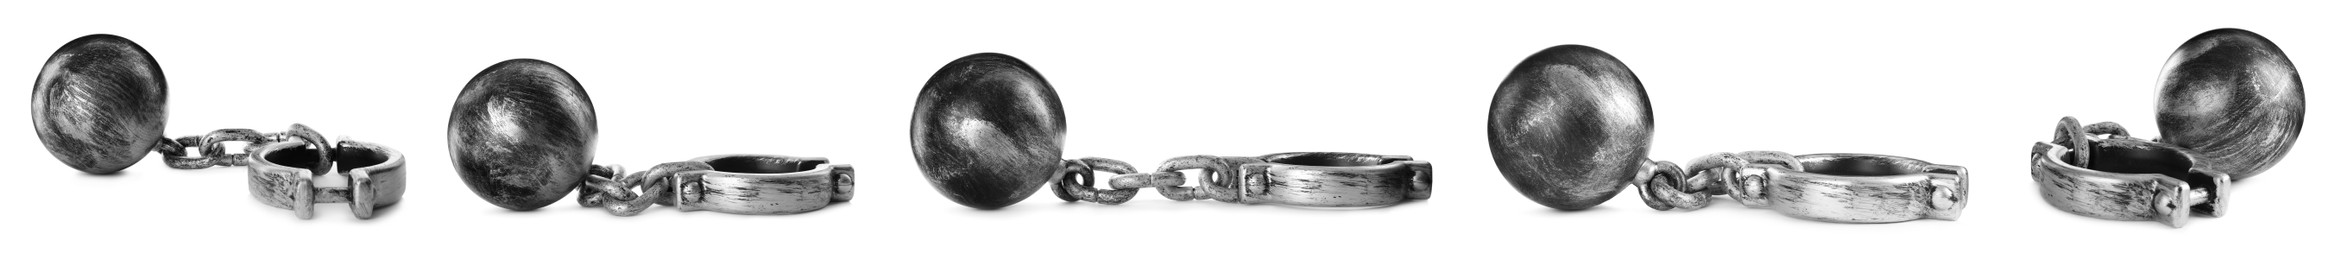 Set with metal balls and chains on white background, banner design 